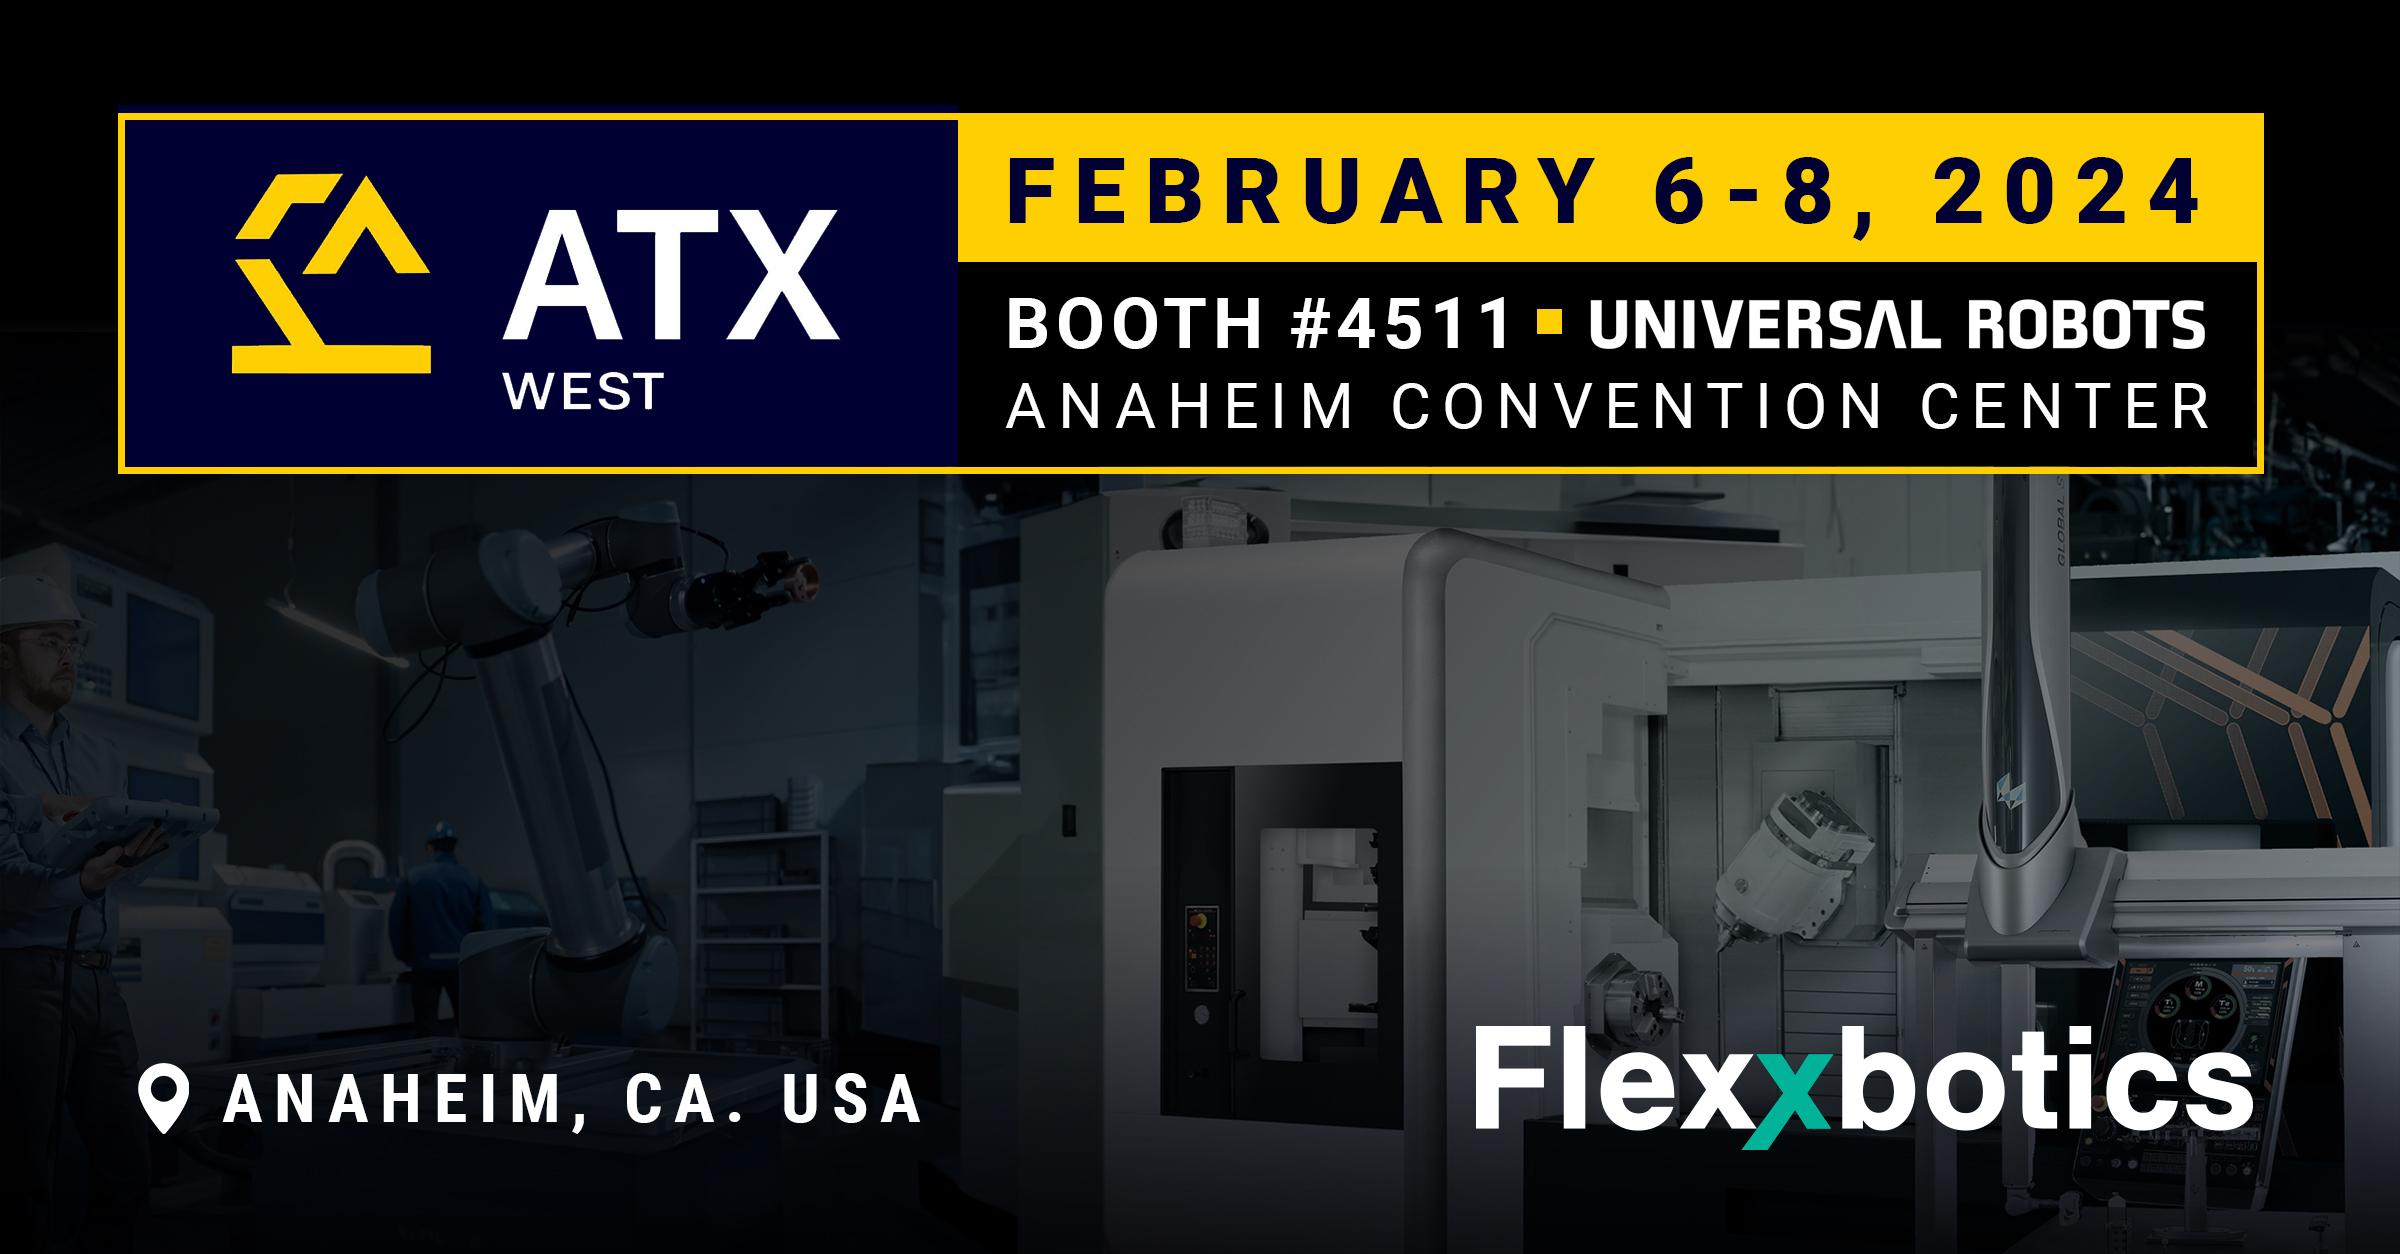 Flexxbotics to be at ATX West 2024 IndMacDig Industrial Machinery